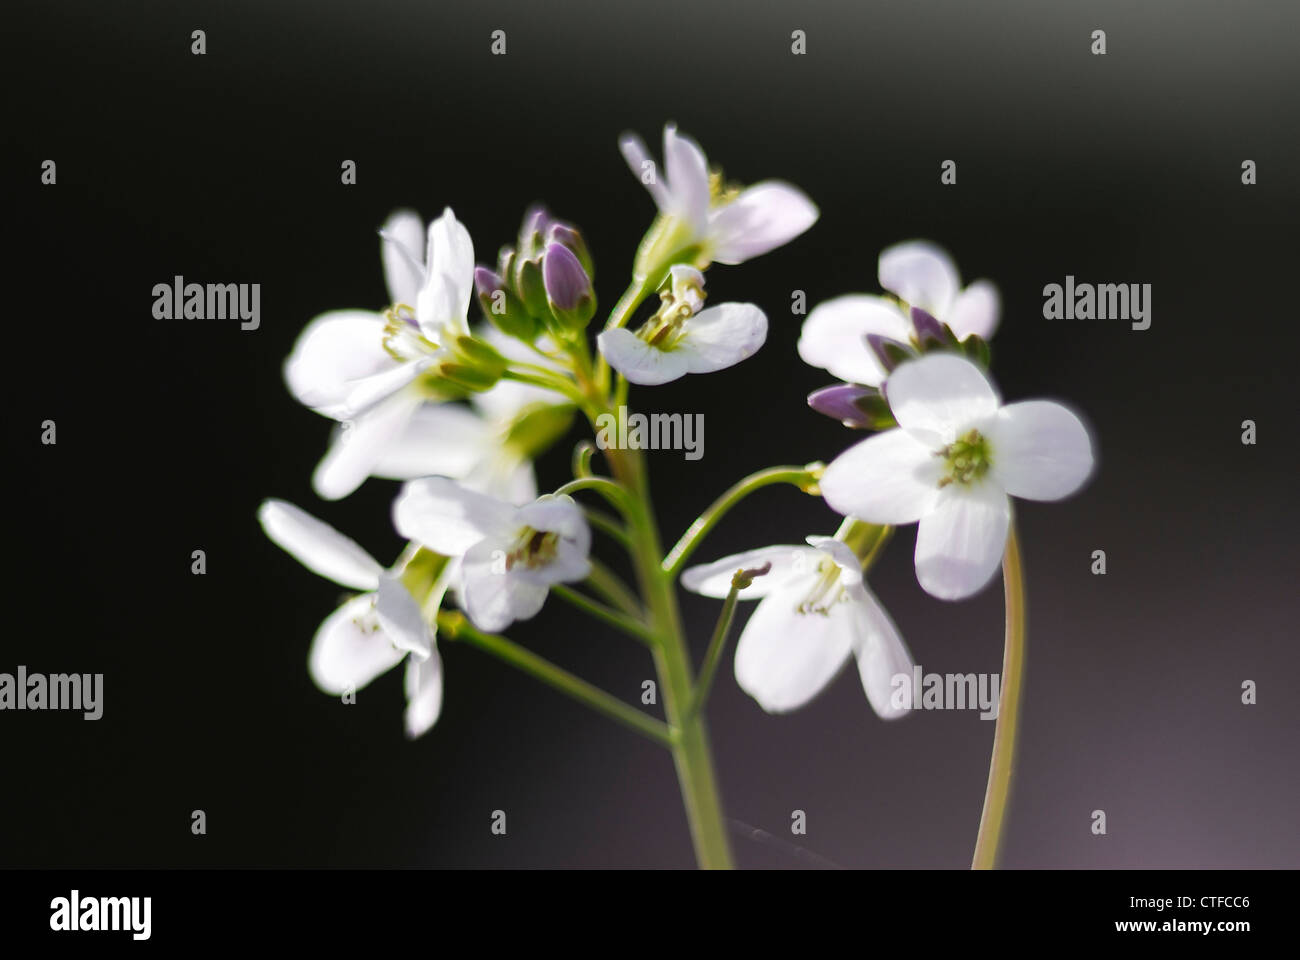 Lady's smock otherwise known as cuckoo flower UK Stock Photo